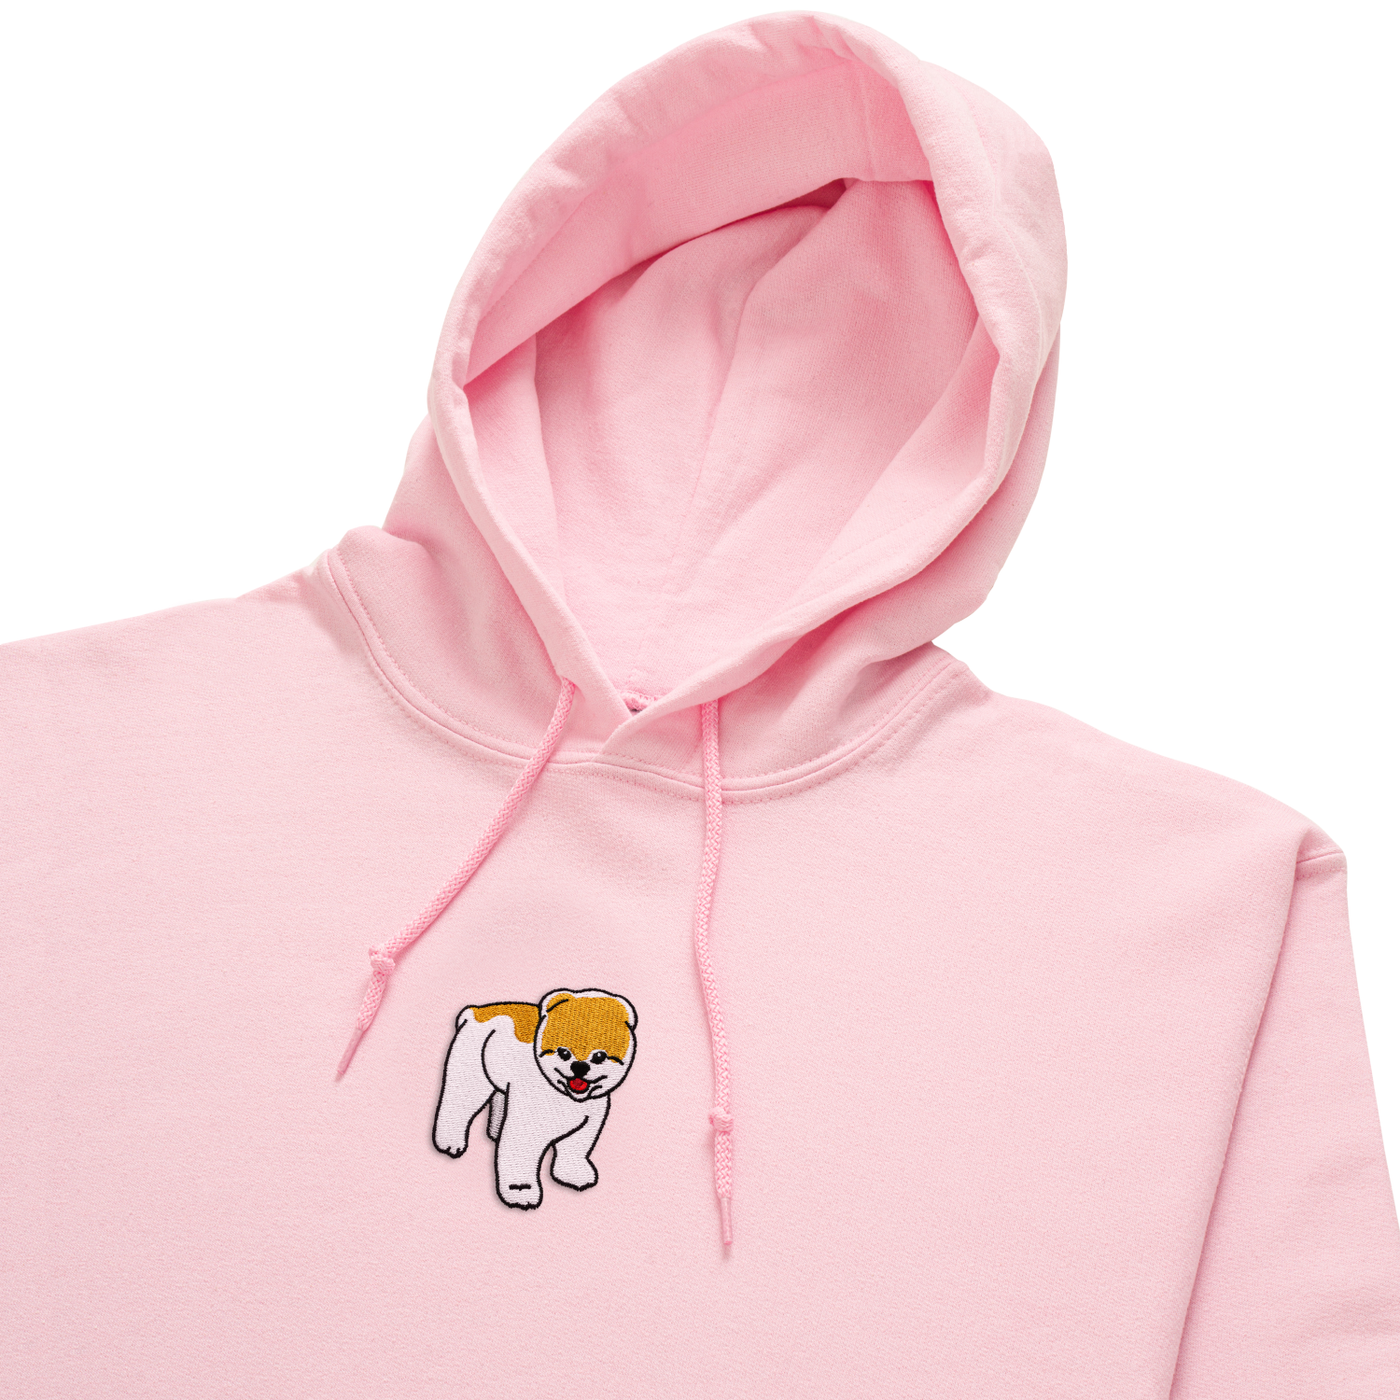 Bobby's Planet Women's Embroidered Pomeranian Hoodie from Paws Dog Cat Animals Collection in Light Pink Color#color_light-pink